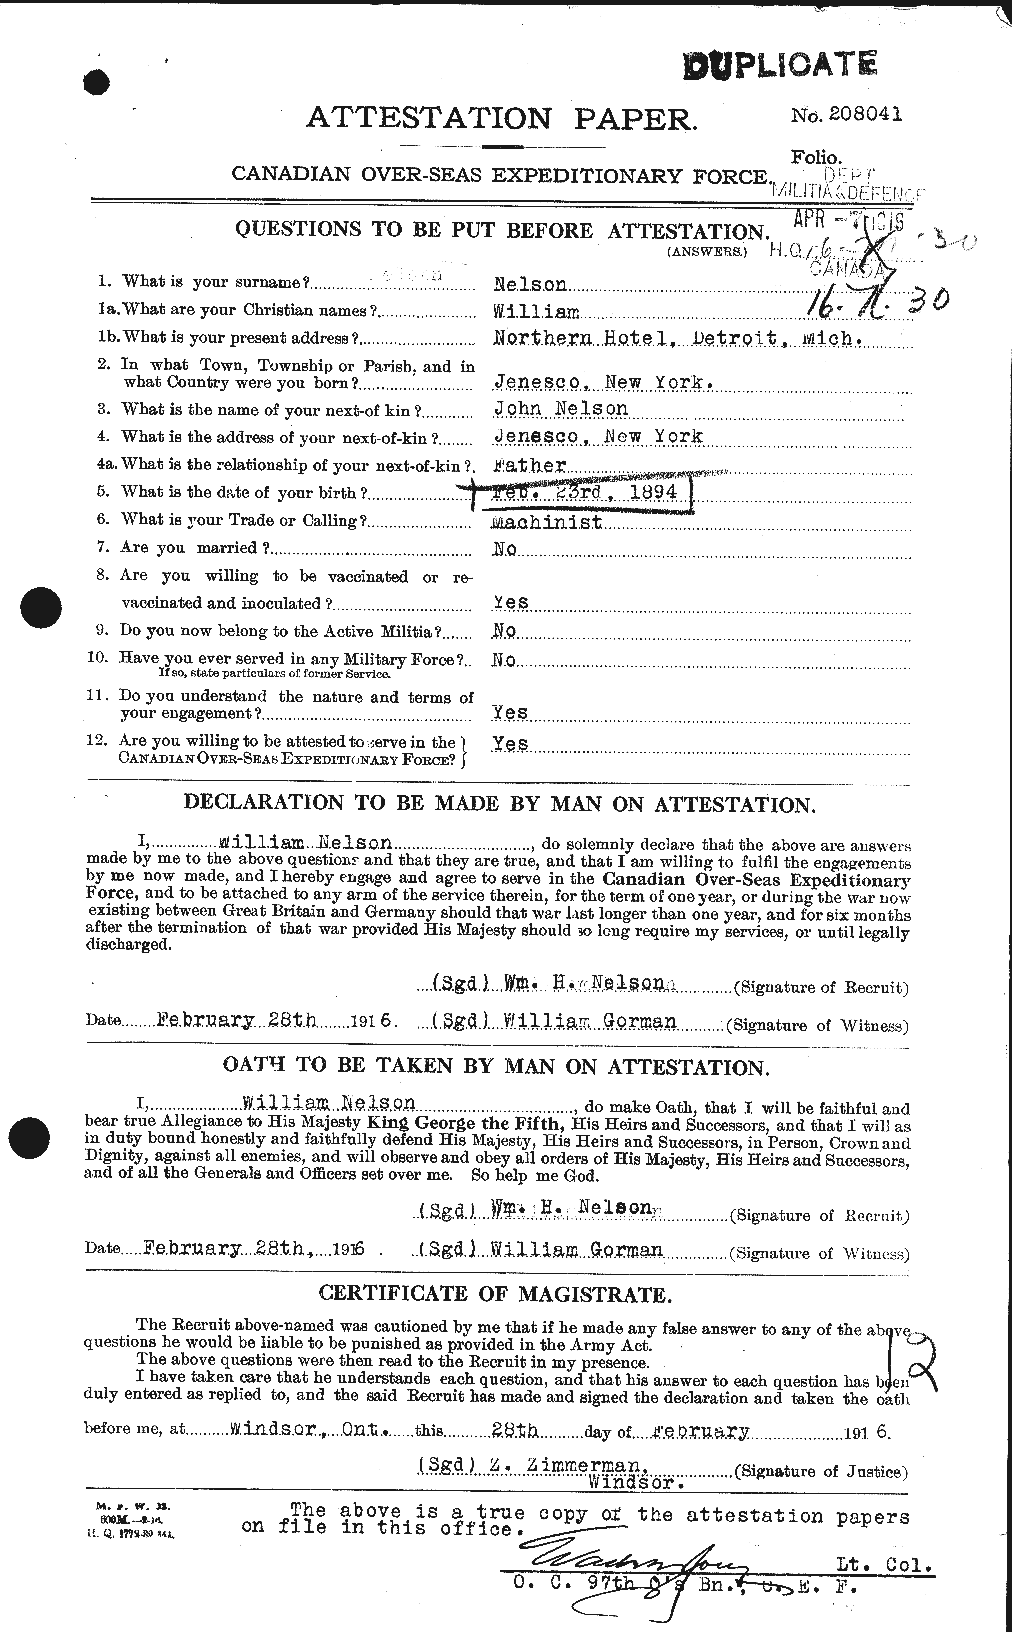 Personnel Records of the First World War - CEF 546608a